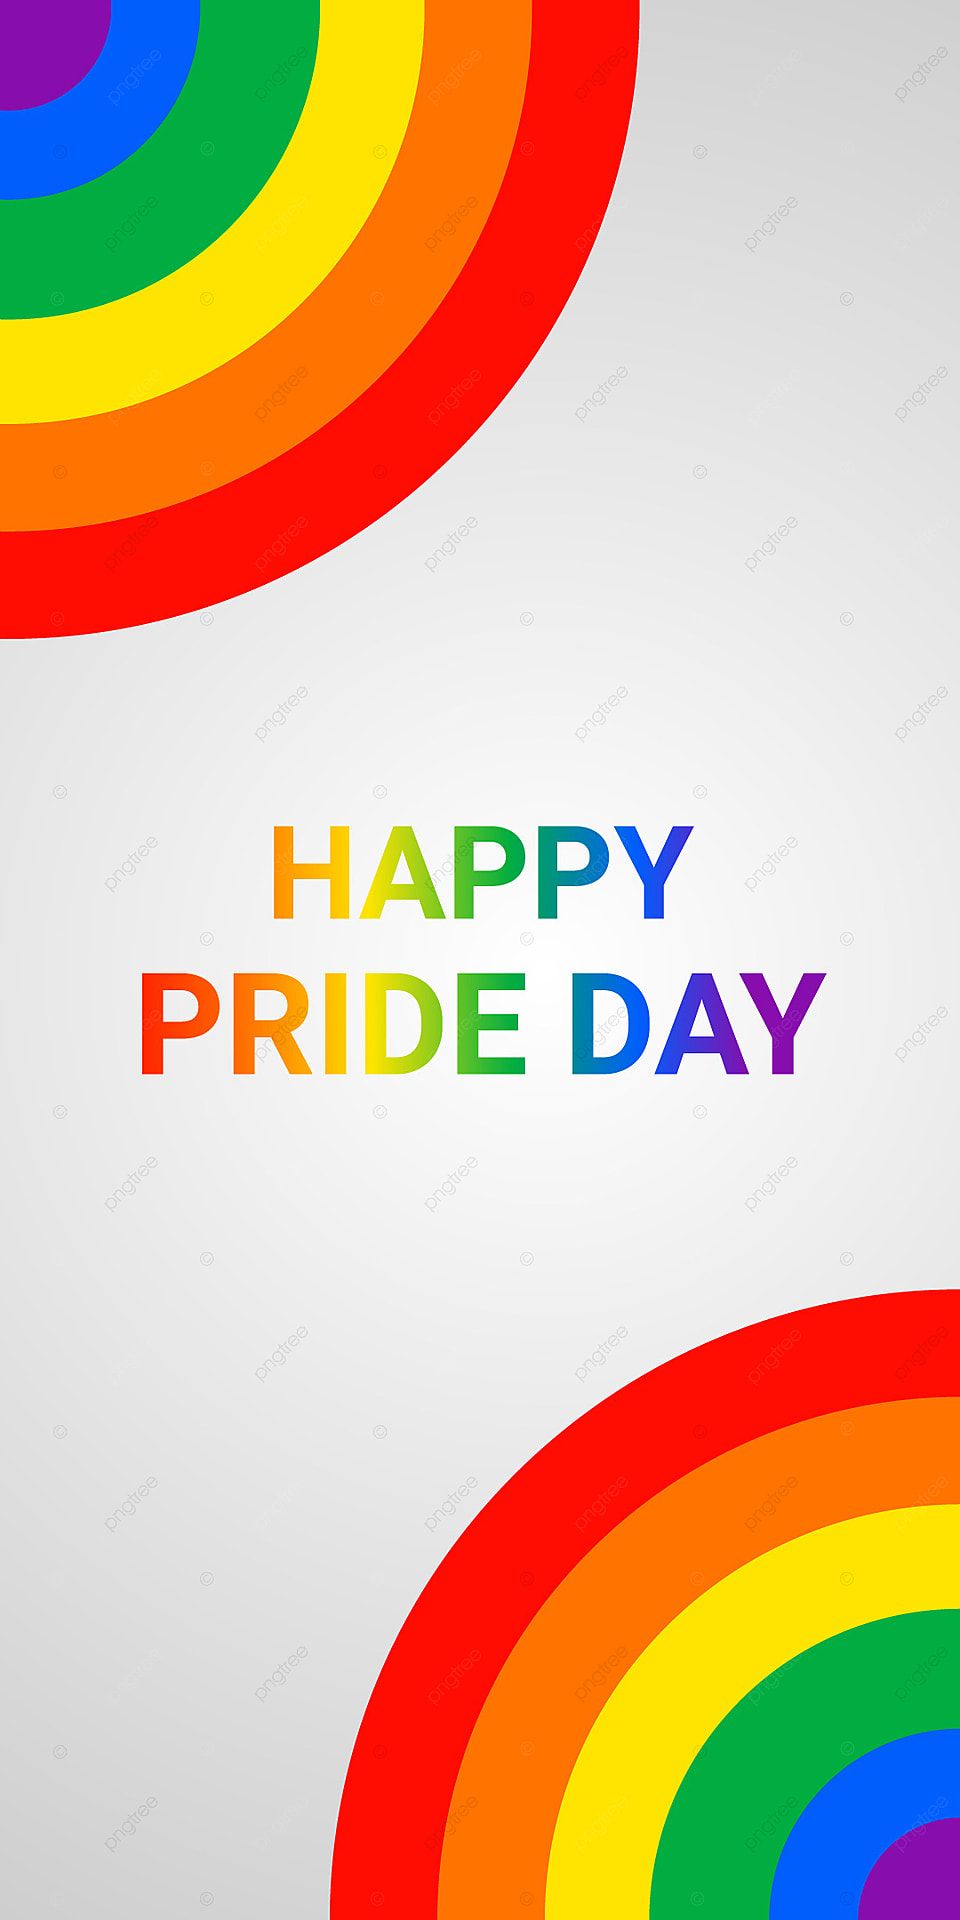 Happy Pride Day Mobile Wallpaper, Pride Month Love Is Equal Mobile Wallpaper, Mobile Wallpaper, Equal Love Is Cool Mobile Wallpaper Background Image for Free Download